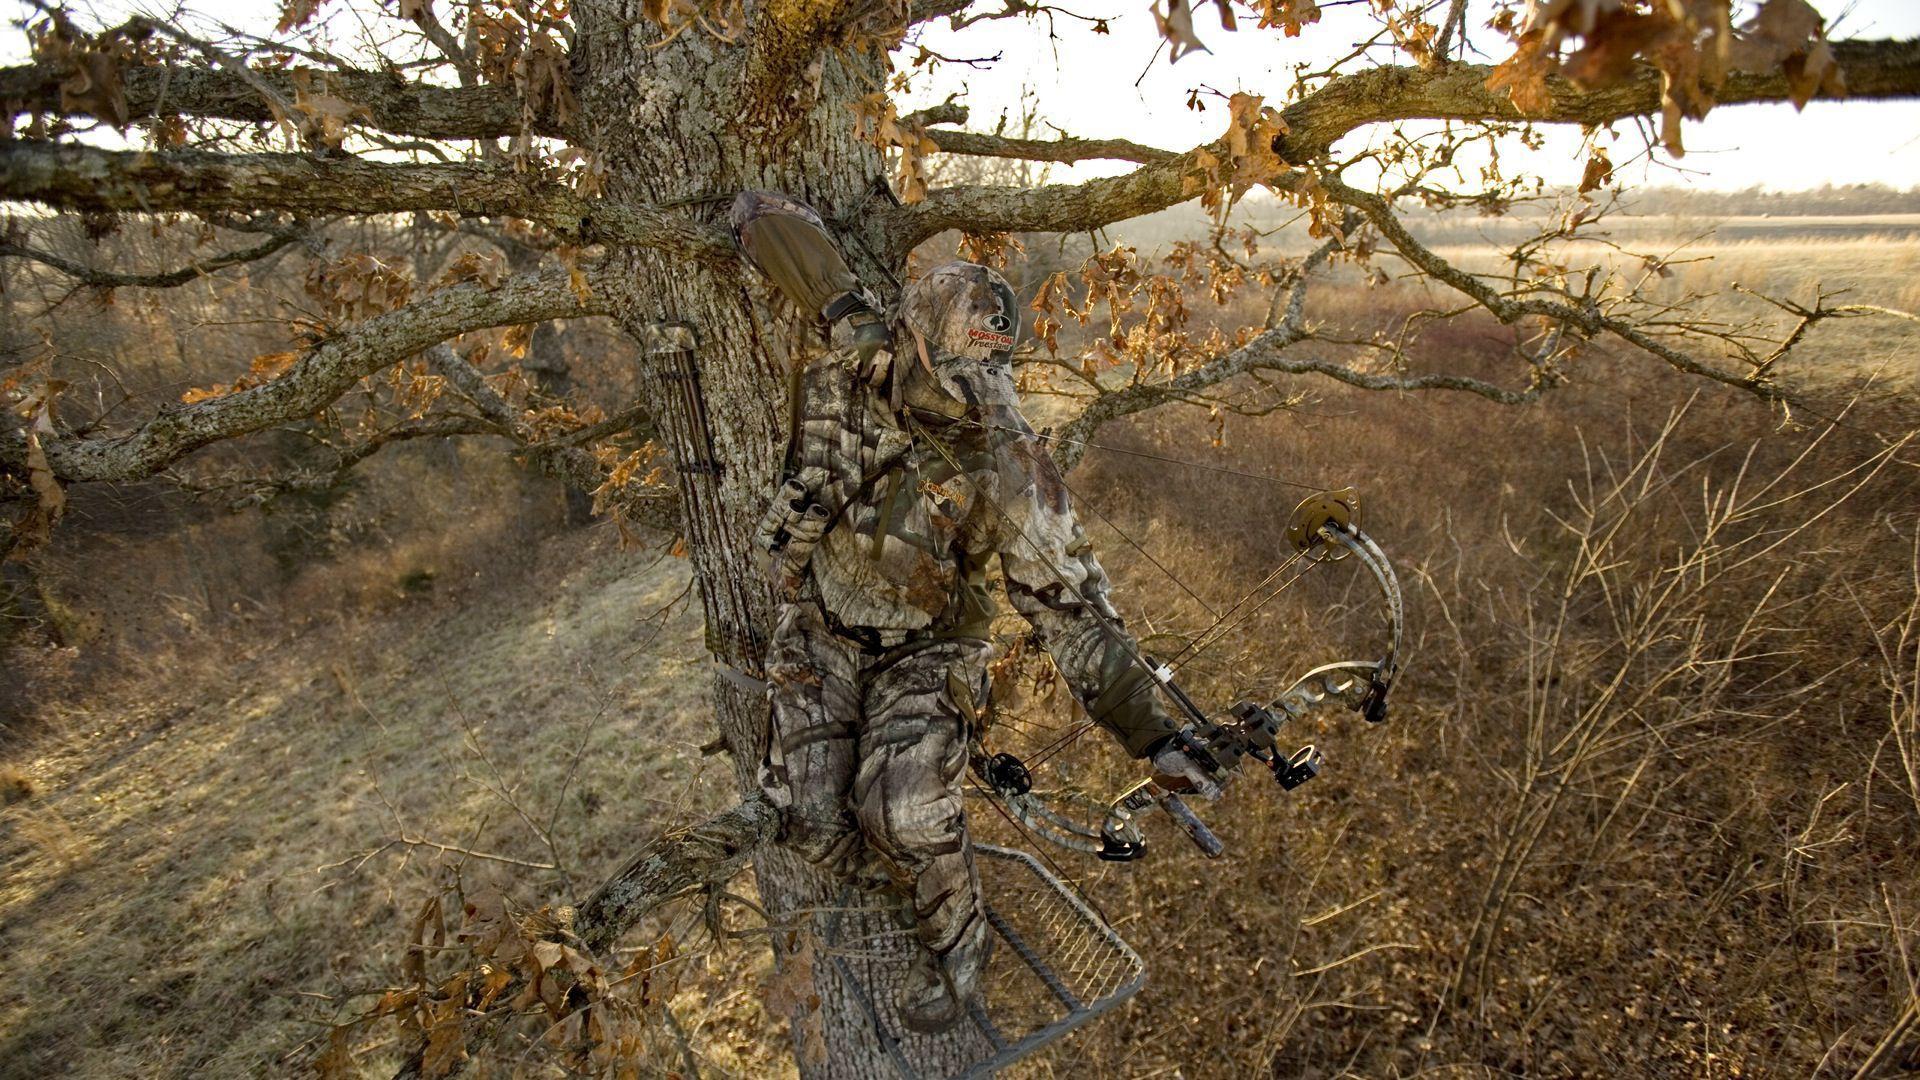 Bowhunting wallpaper Gallery